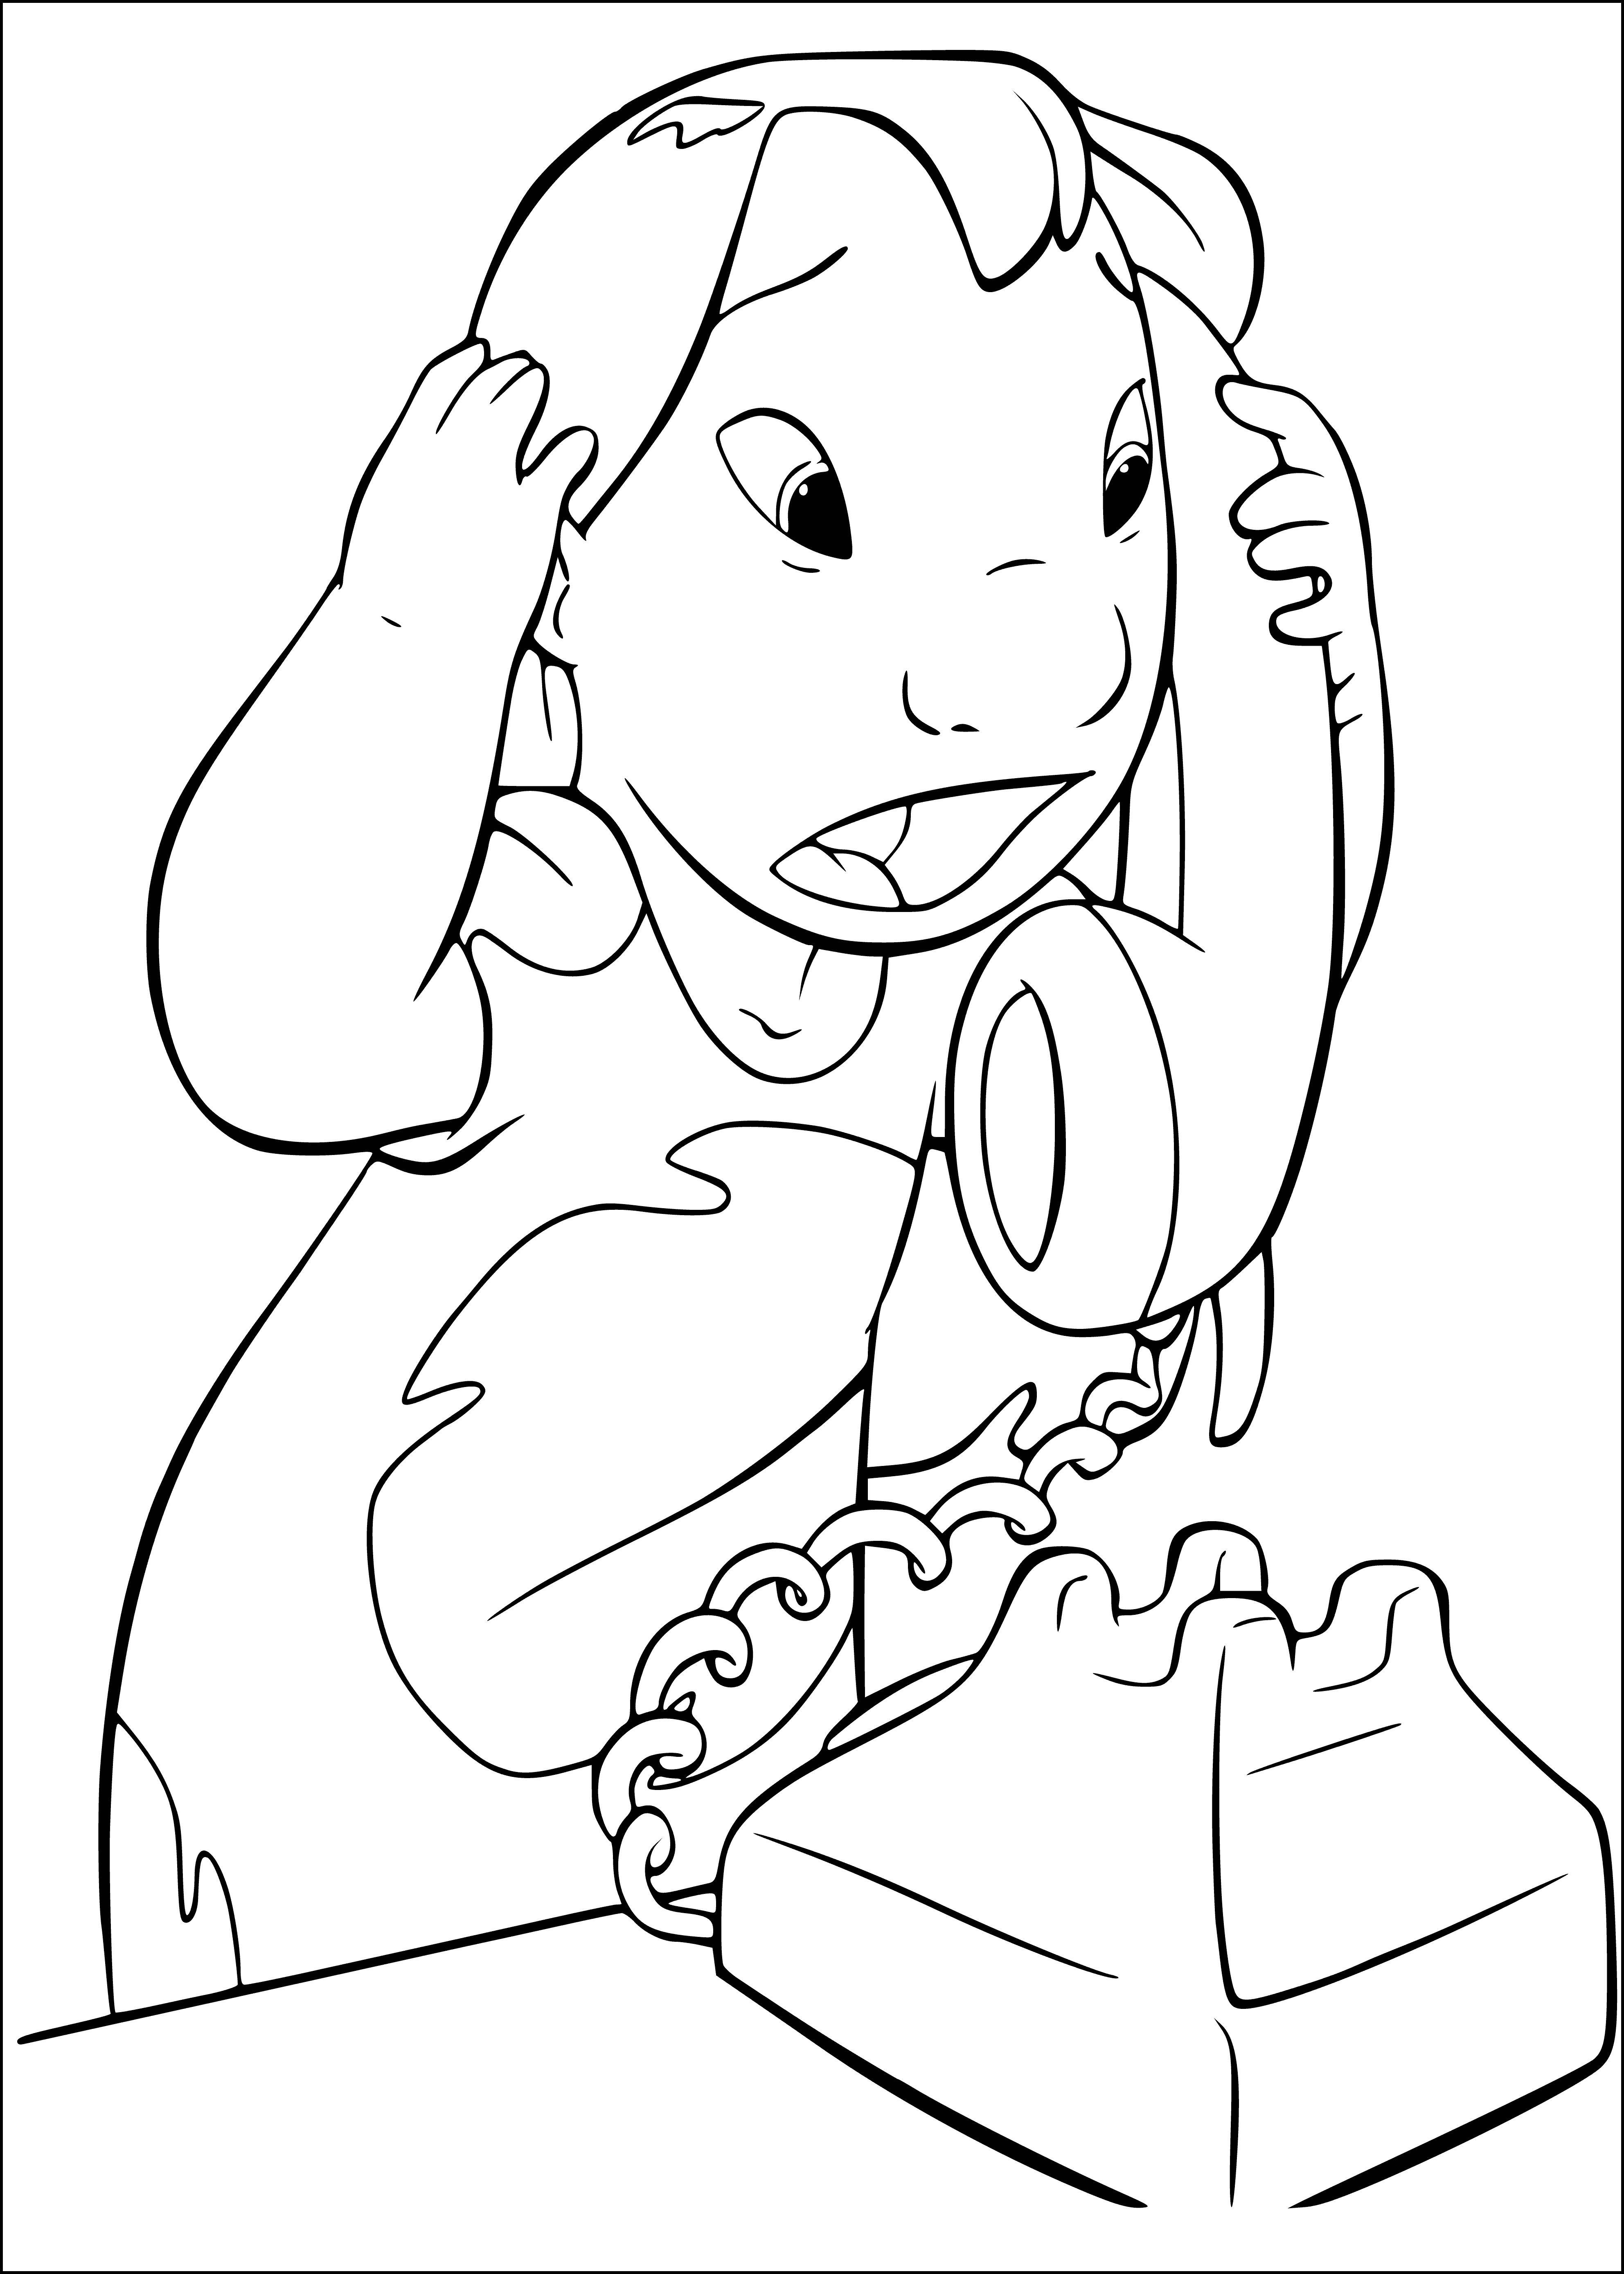 coloring page: Lilo stands seriously, phone up to her ear, in front of a window in her coloring page.